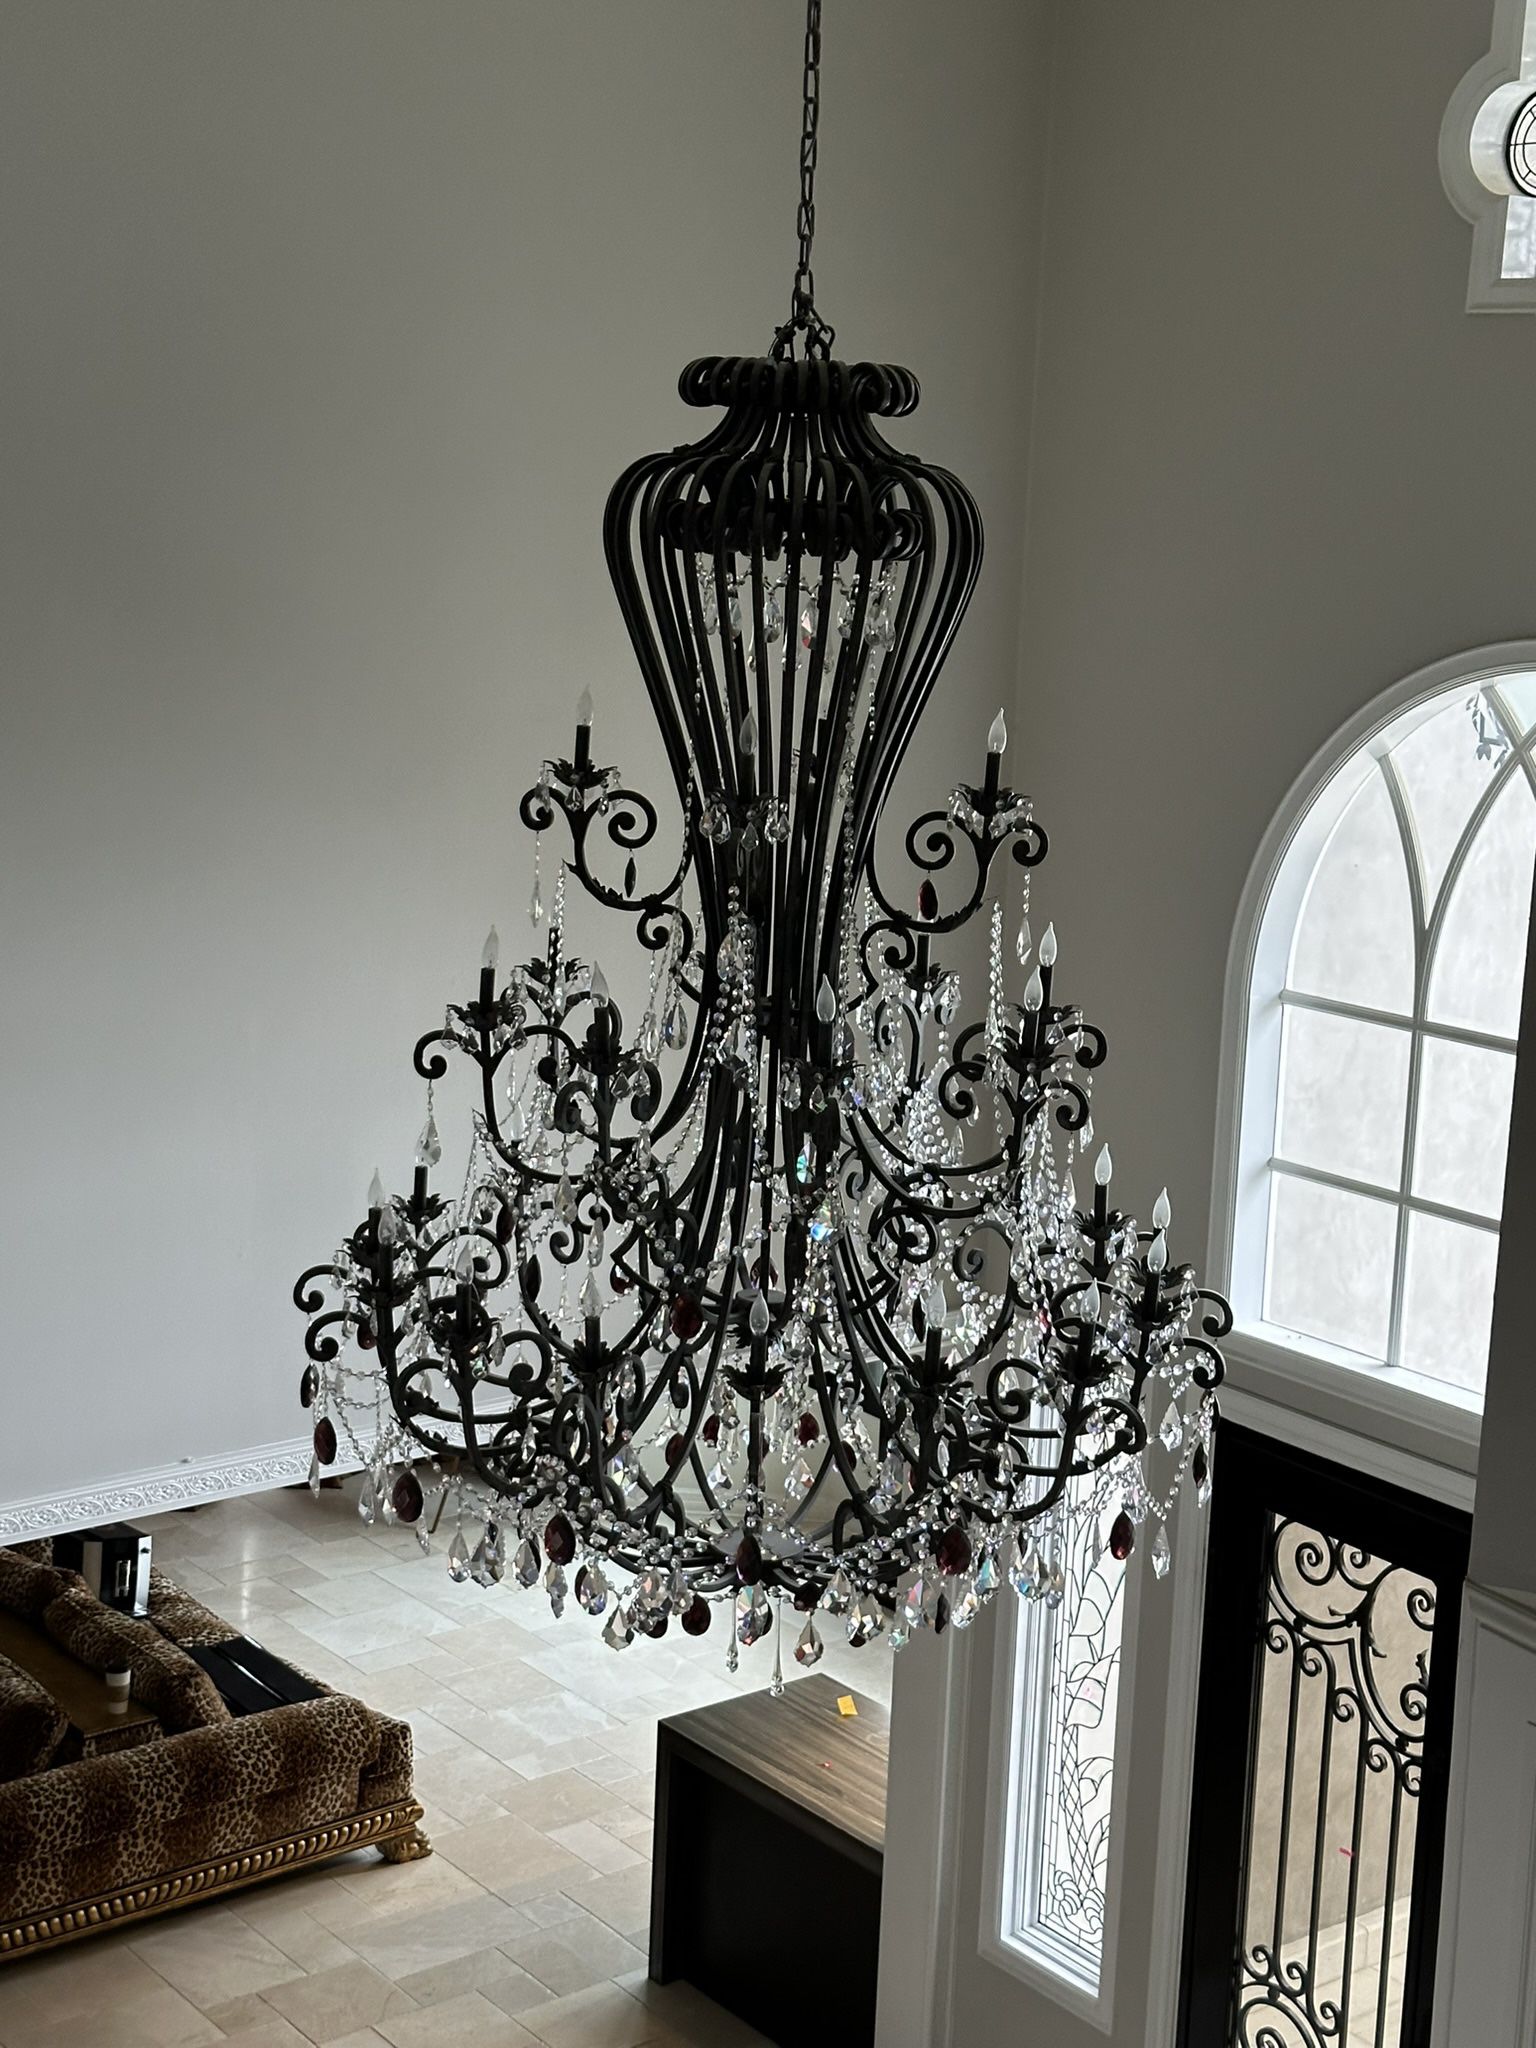 Large Estate Chandelier Free To Have 